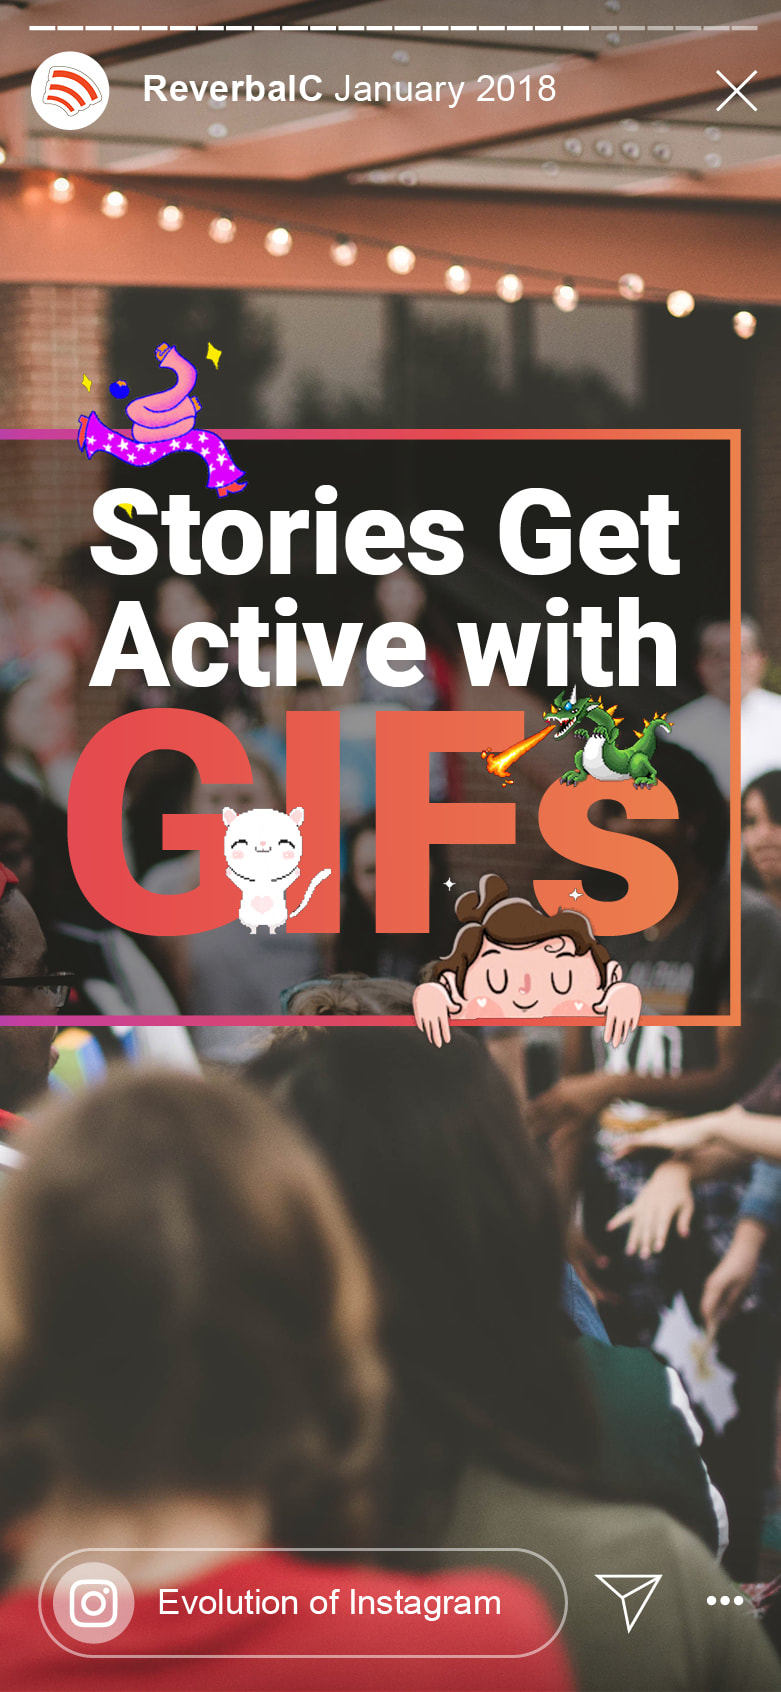 When did GIF stickers first come to Instagram Stories?